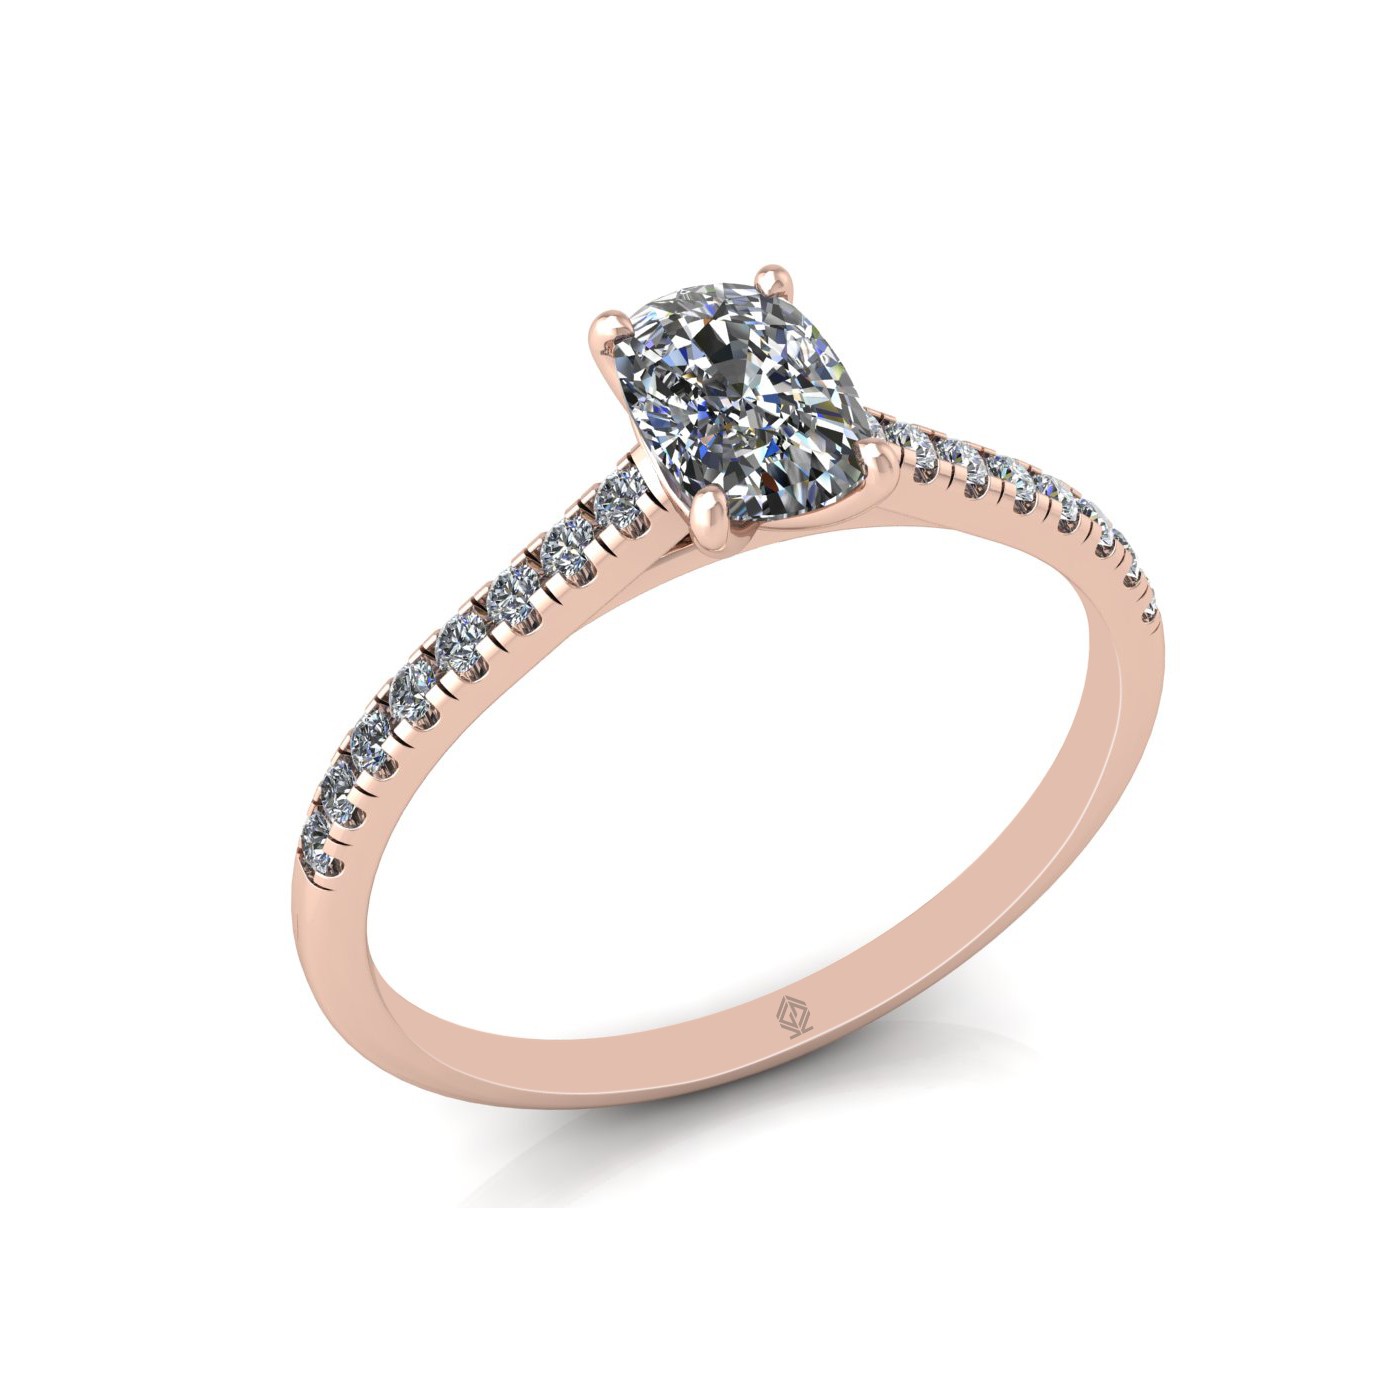 18k rose gold  4 prongs cushion cut diamond engagement ring with whisper thin pavÉ set band Photos & images